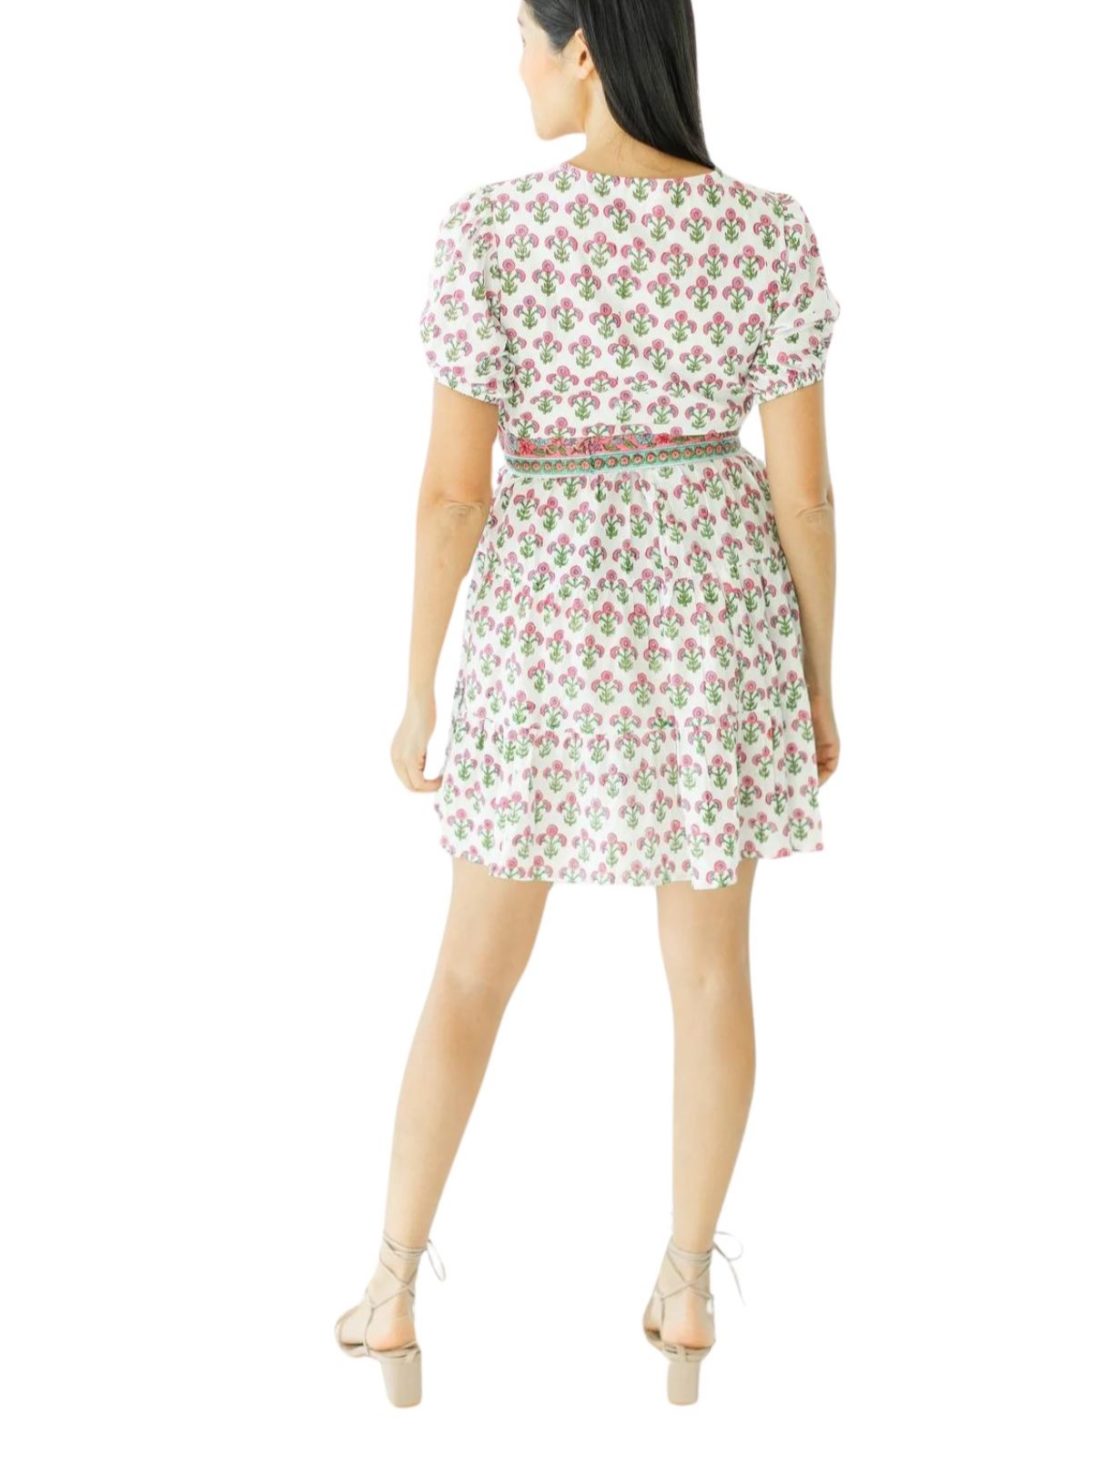 victoria dunn mollie dress in morning glory